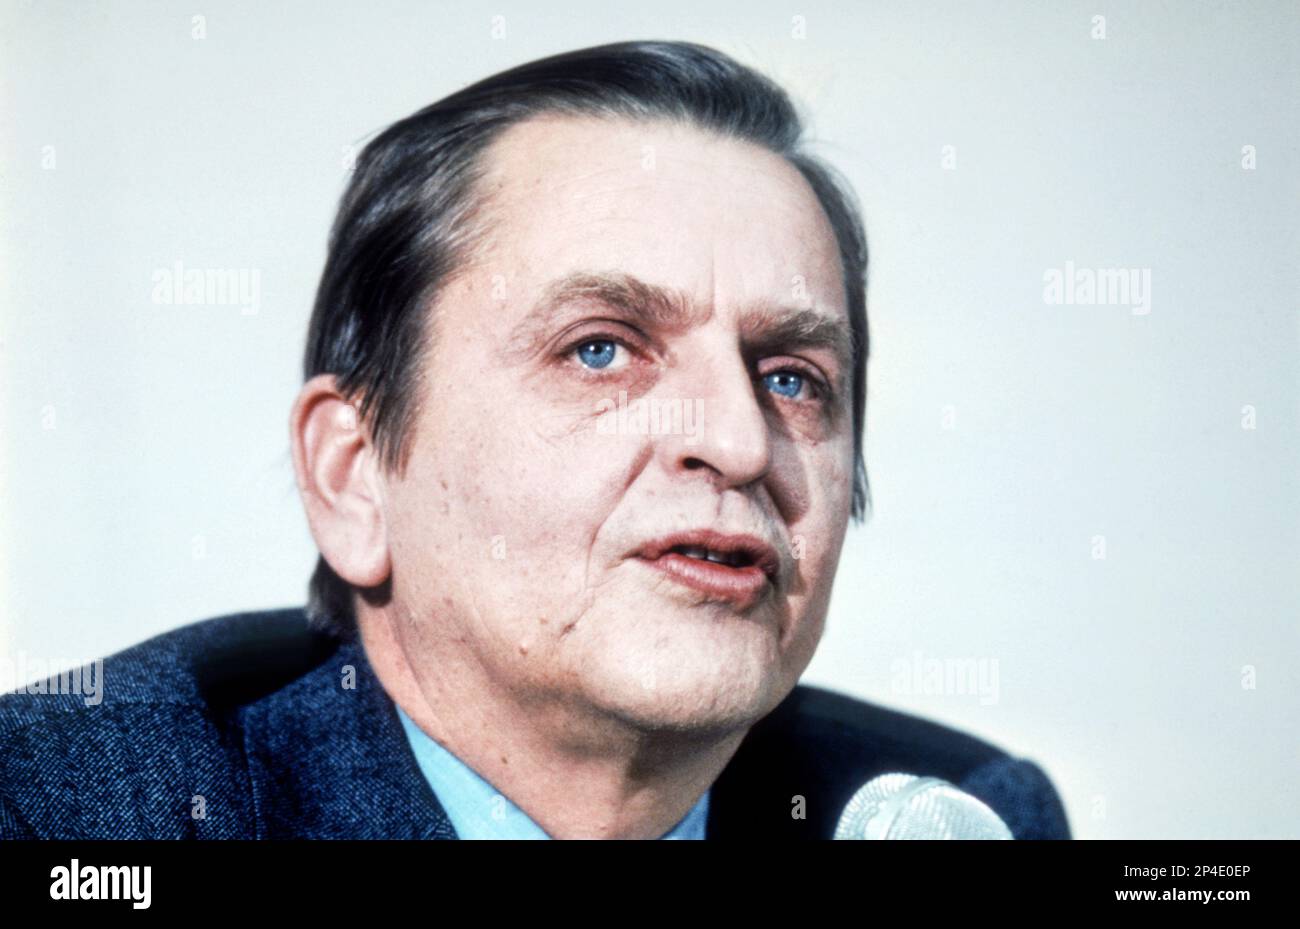 ARCHIVE 1976Swedish politician Olof Palme. He led Sweden's Social Democratic Workers' Party 1969-1986 and was Prime Minister  of Sweden1969-1976 and 1982-1986. Photo: SVT / TT Code: 5600 Stock Photo